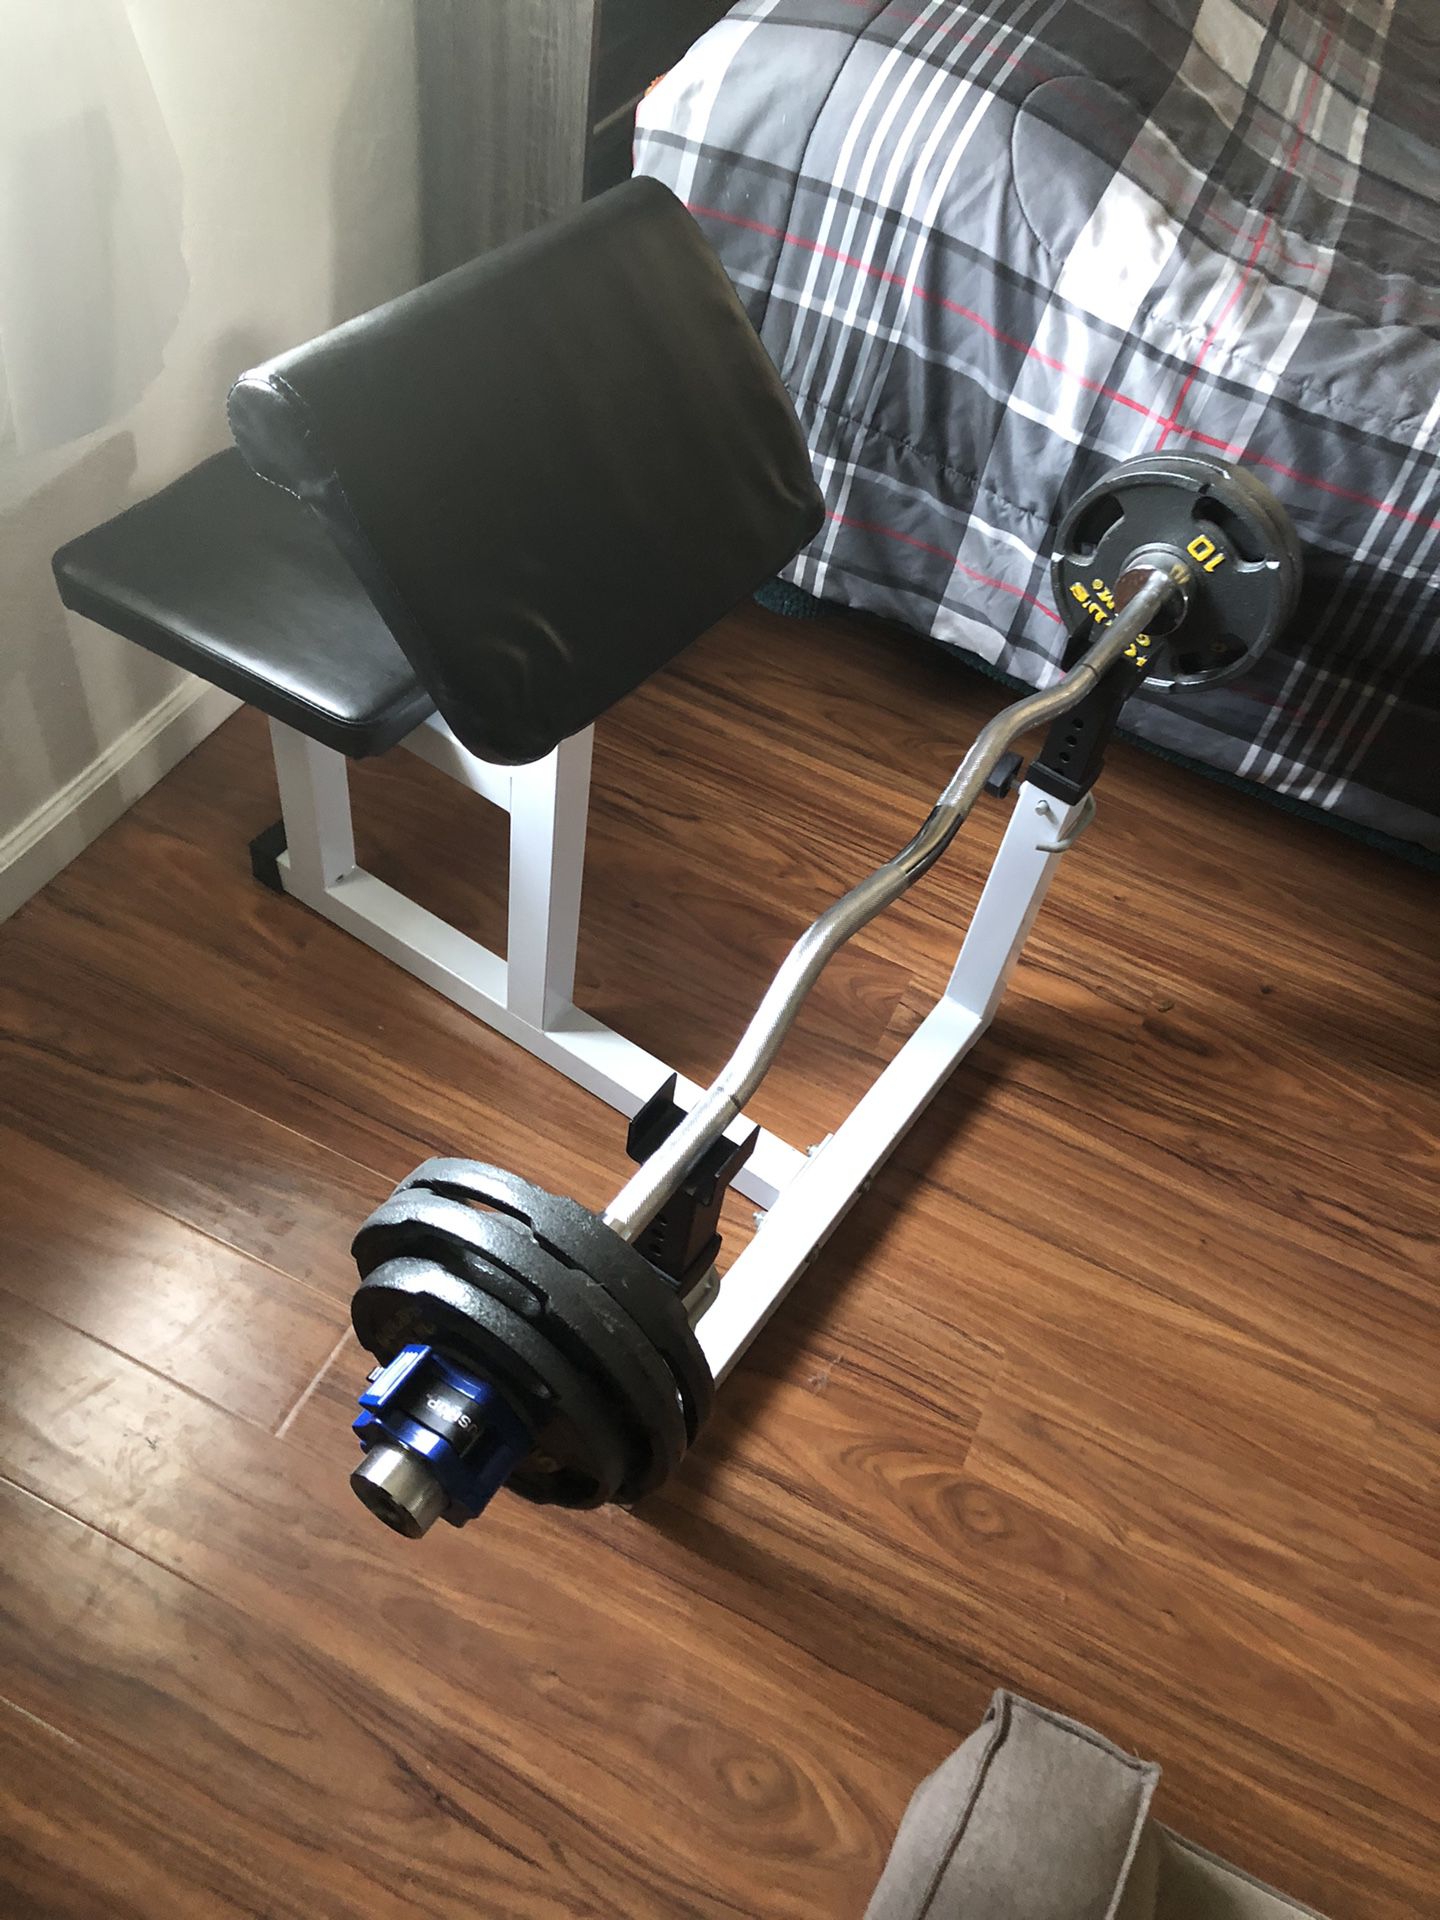 Preacher Curl Bench With Curl Bar And 50 Lb Weight Set